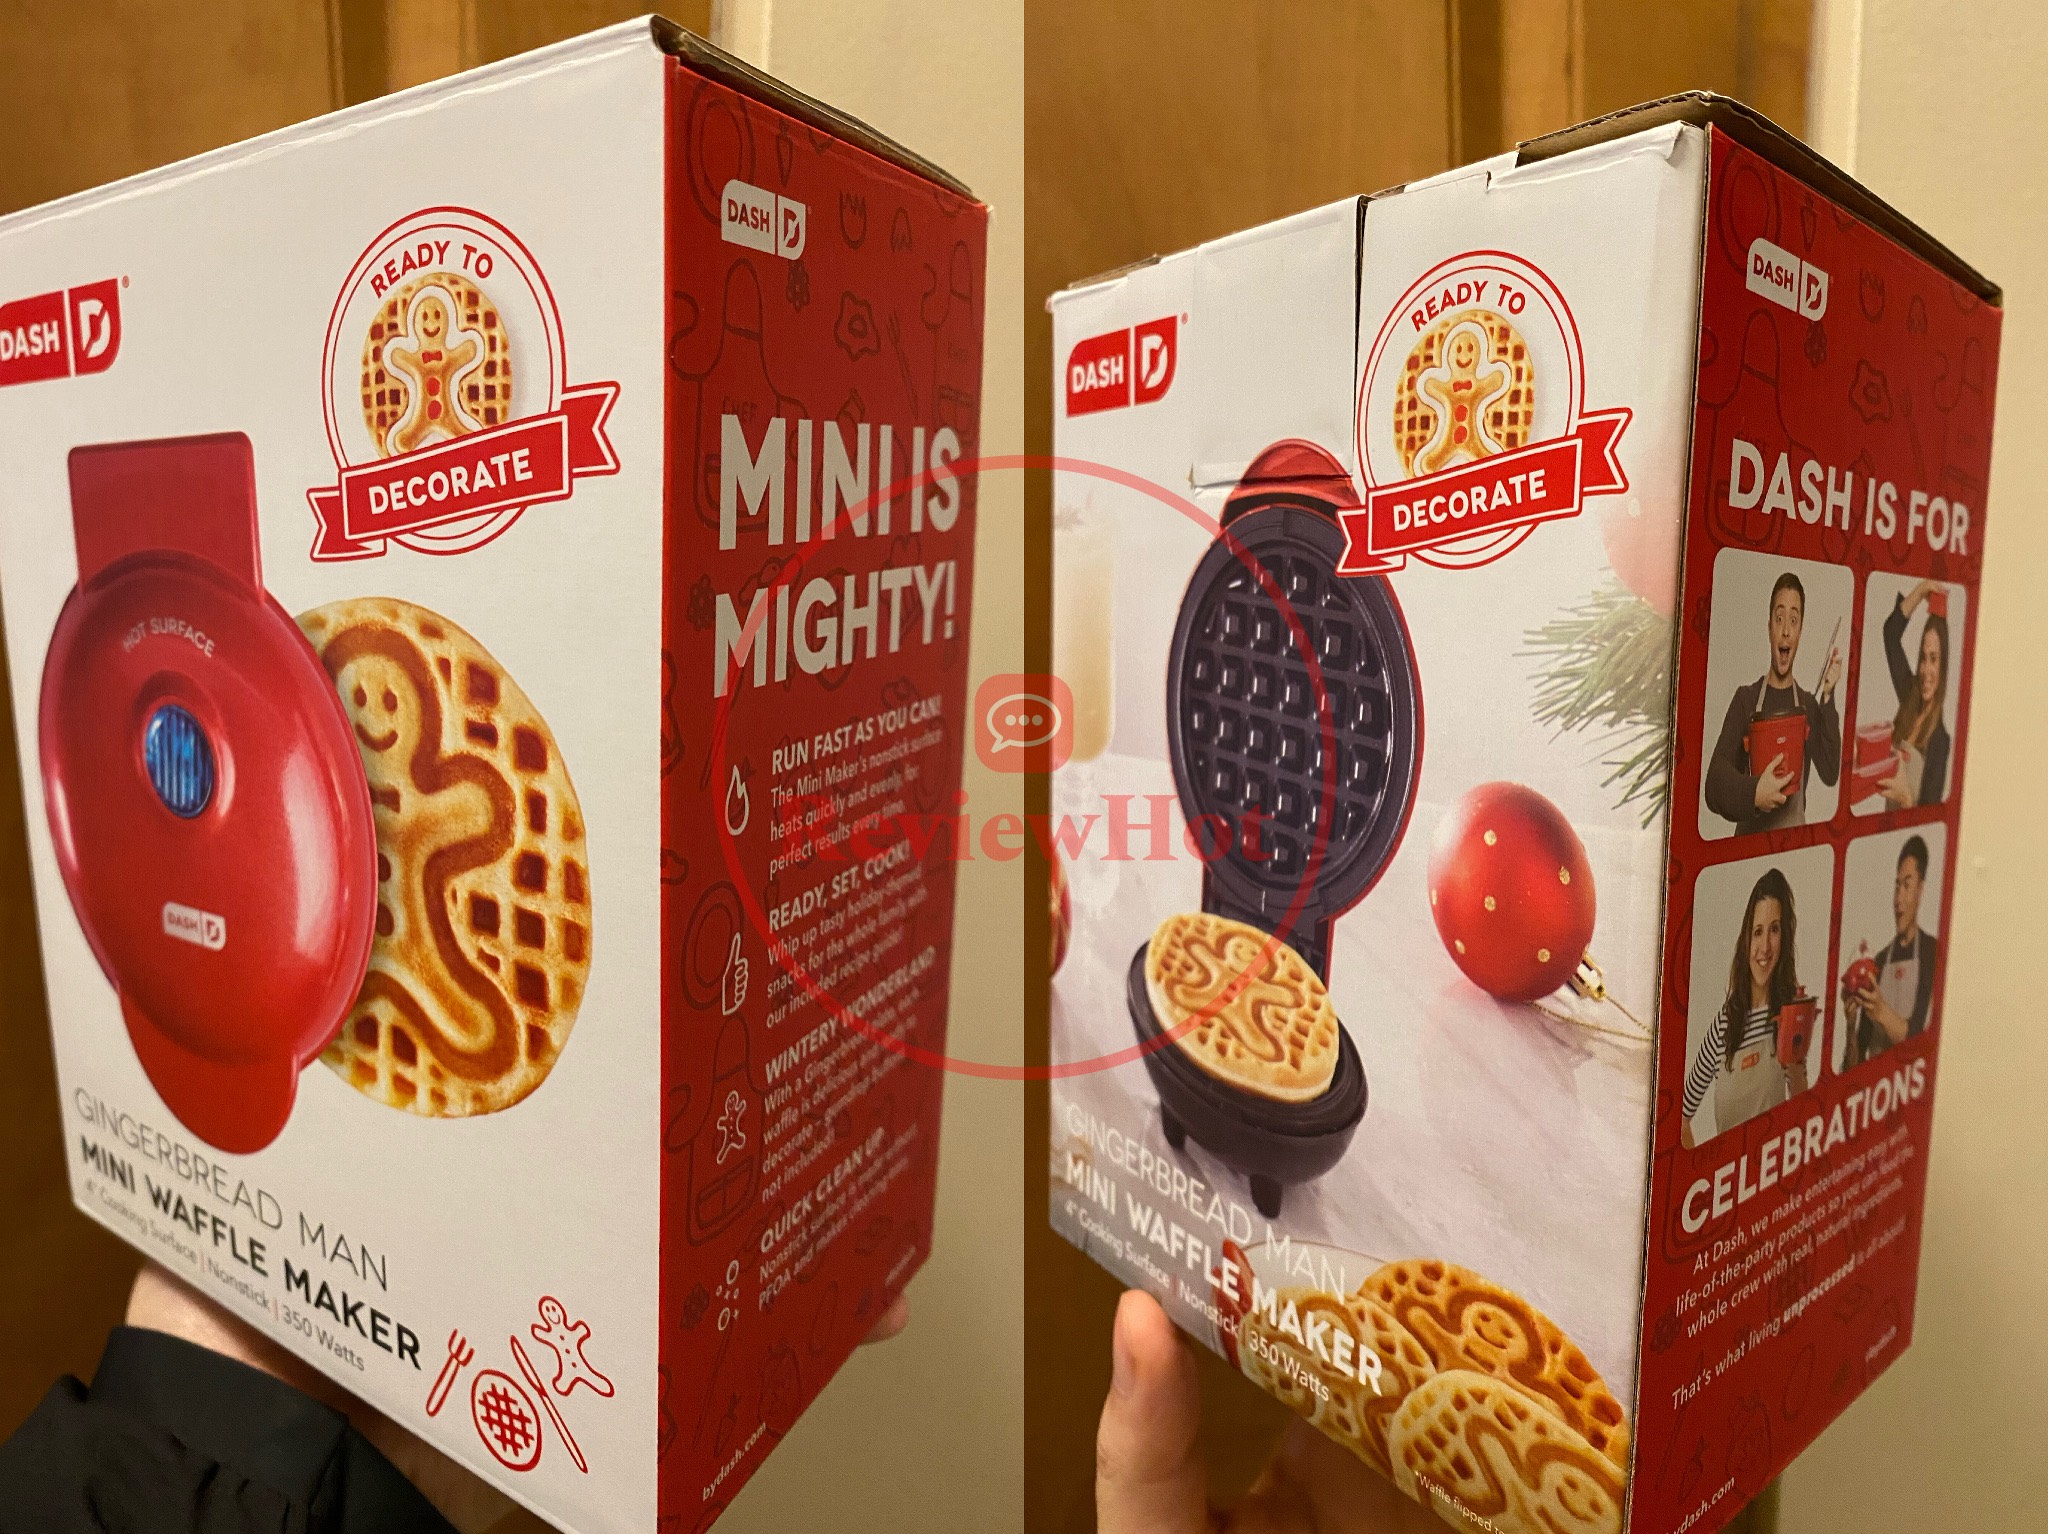 Dash Mini Waffle Maker package looking